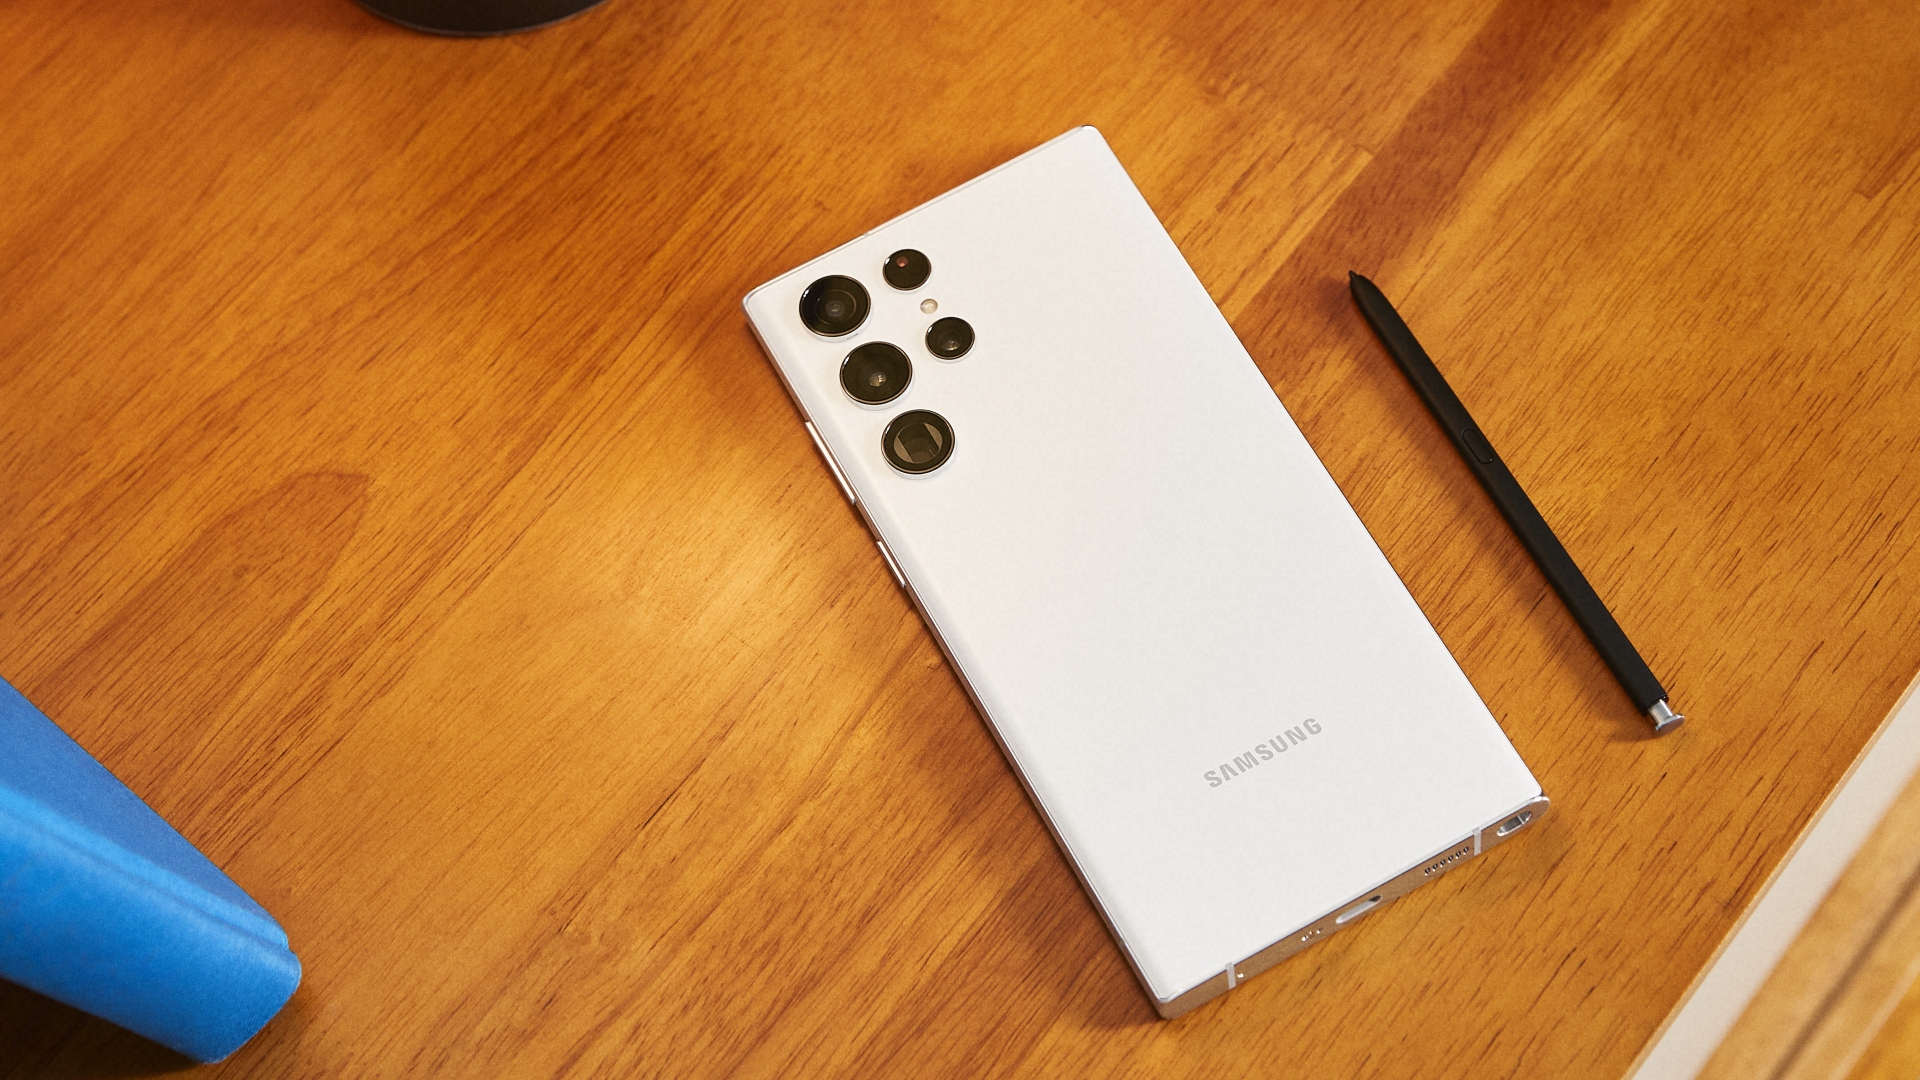 Samsung Galaxy Note 10: Preorder Price, Release Date, and Specs